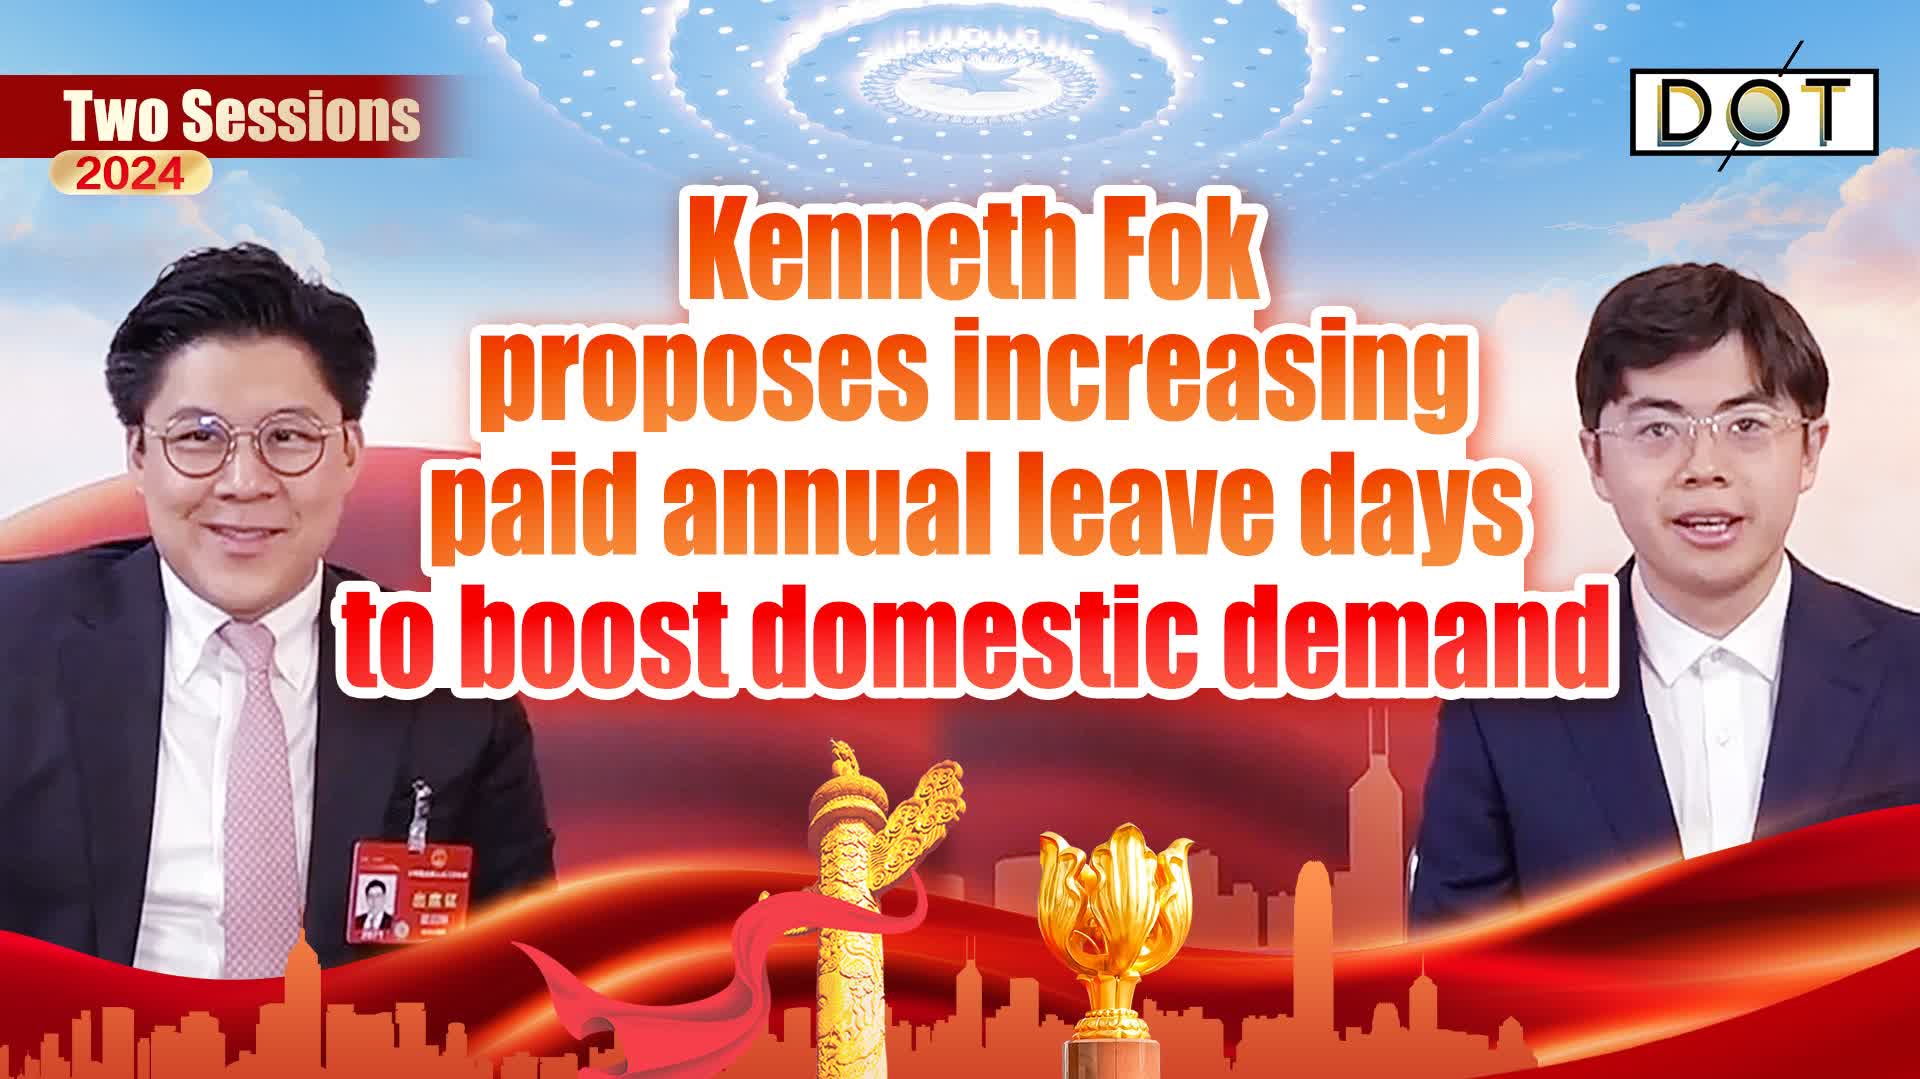 Two Sessions 2024 | (Watch This) Kenneth Fok proposes increasing paid annual leave days to boost domestic demand, relieve youngsters' stress